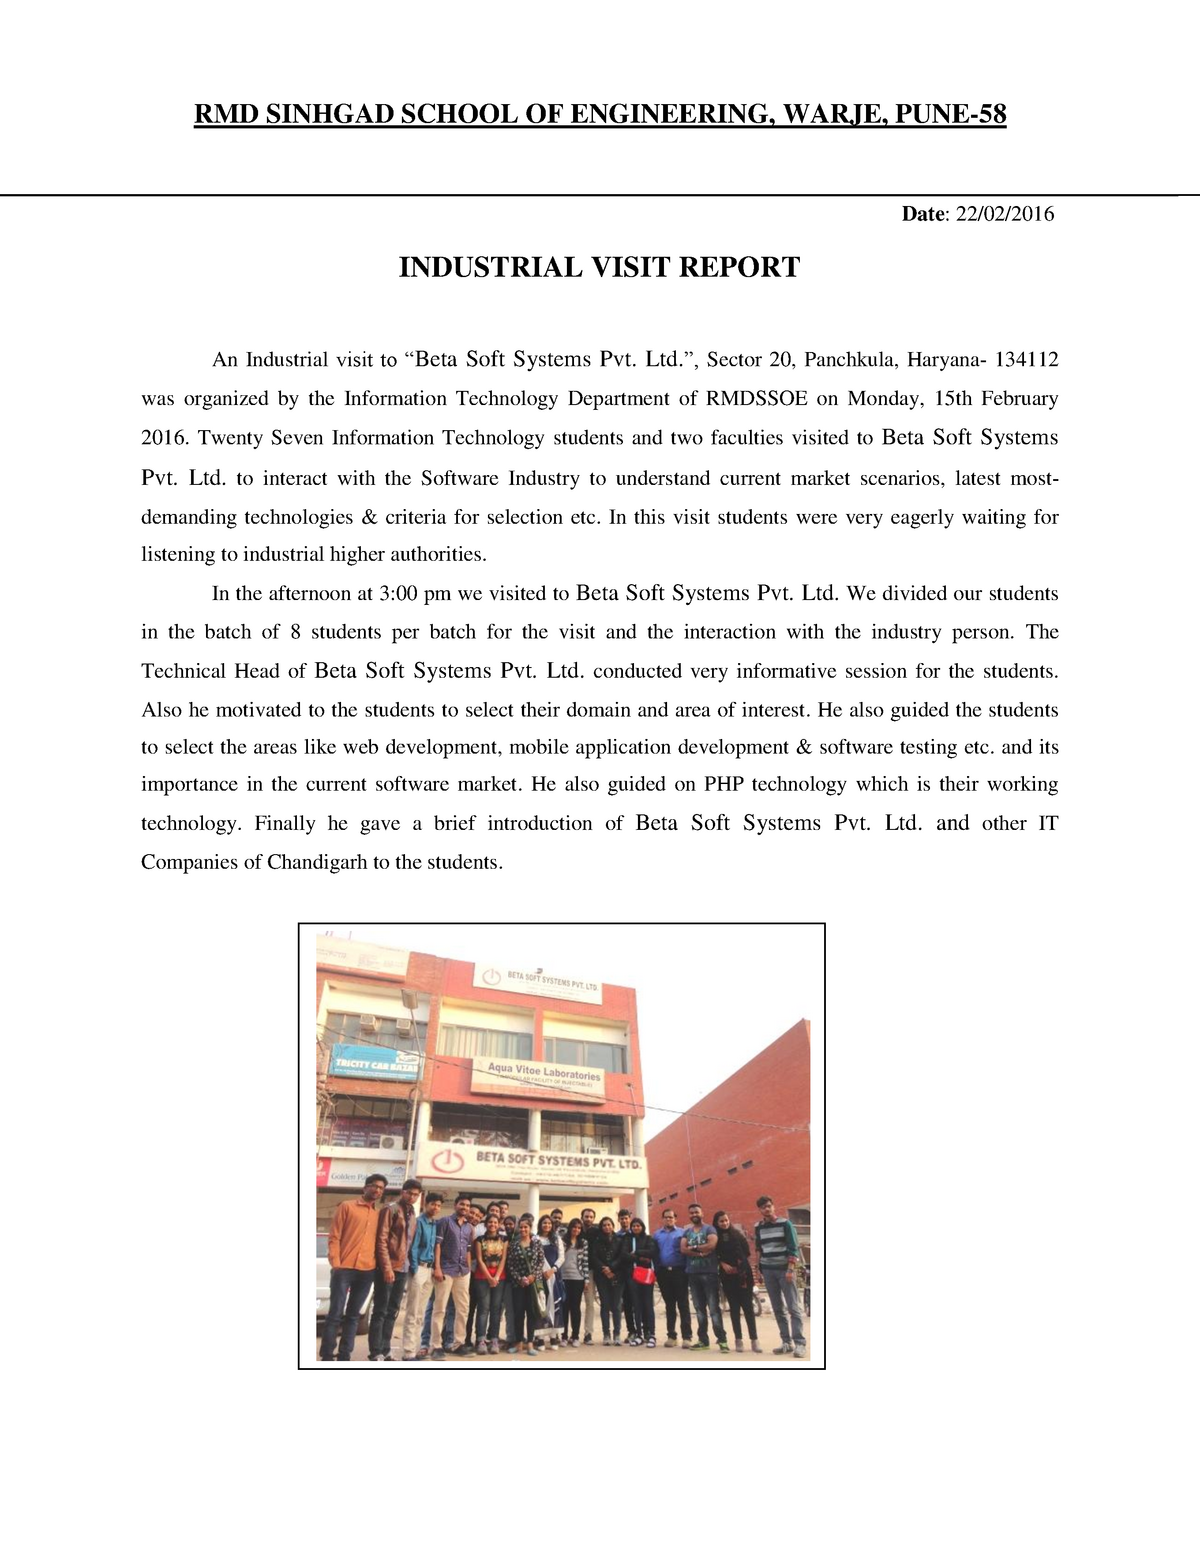 report on industrial visit by students